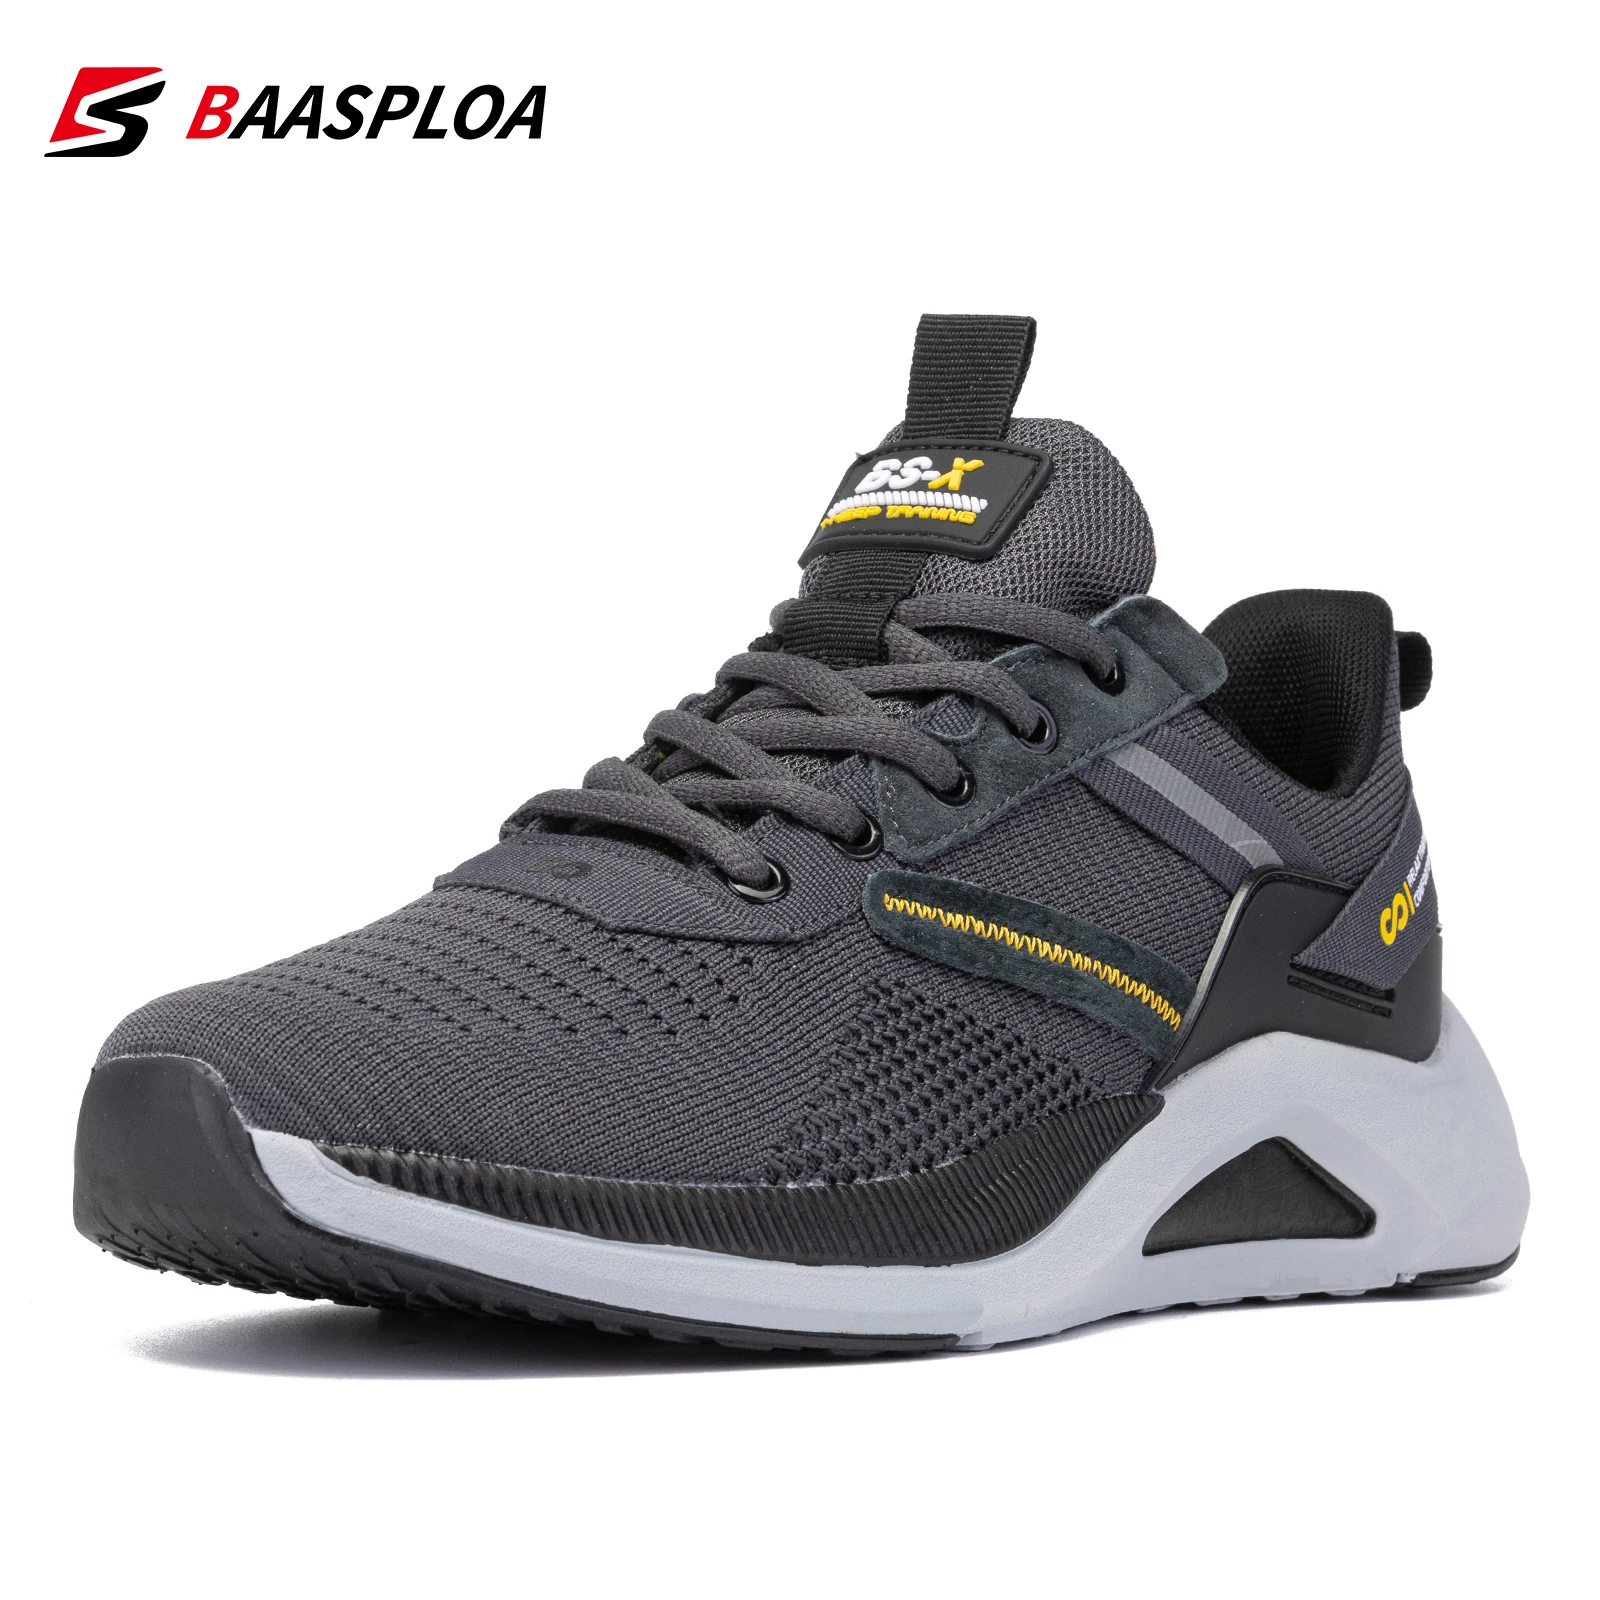 Baasploa 2022 Men's Shoes New Sneaker Breathable running Shoes Fashion comfortable Casual Shoes Mesh Athletic shoes